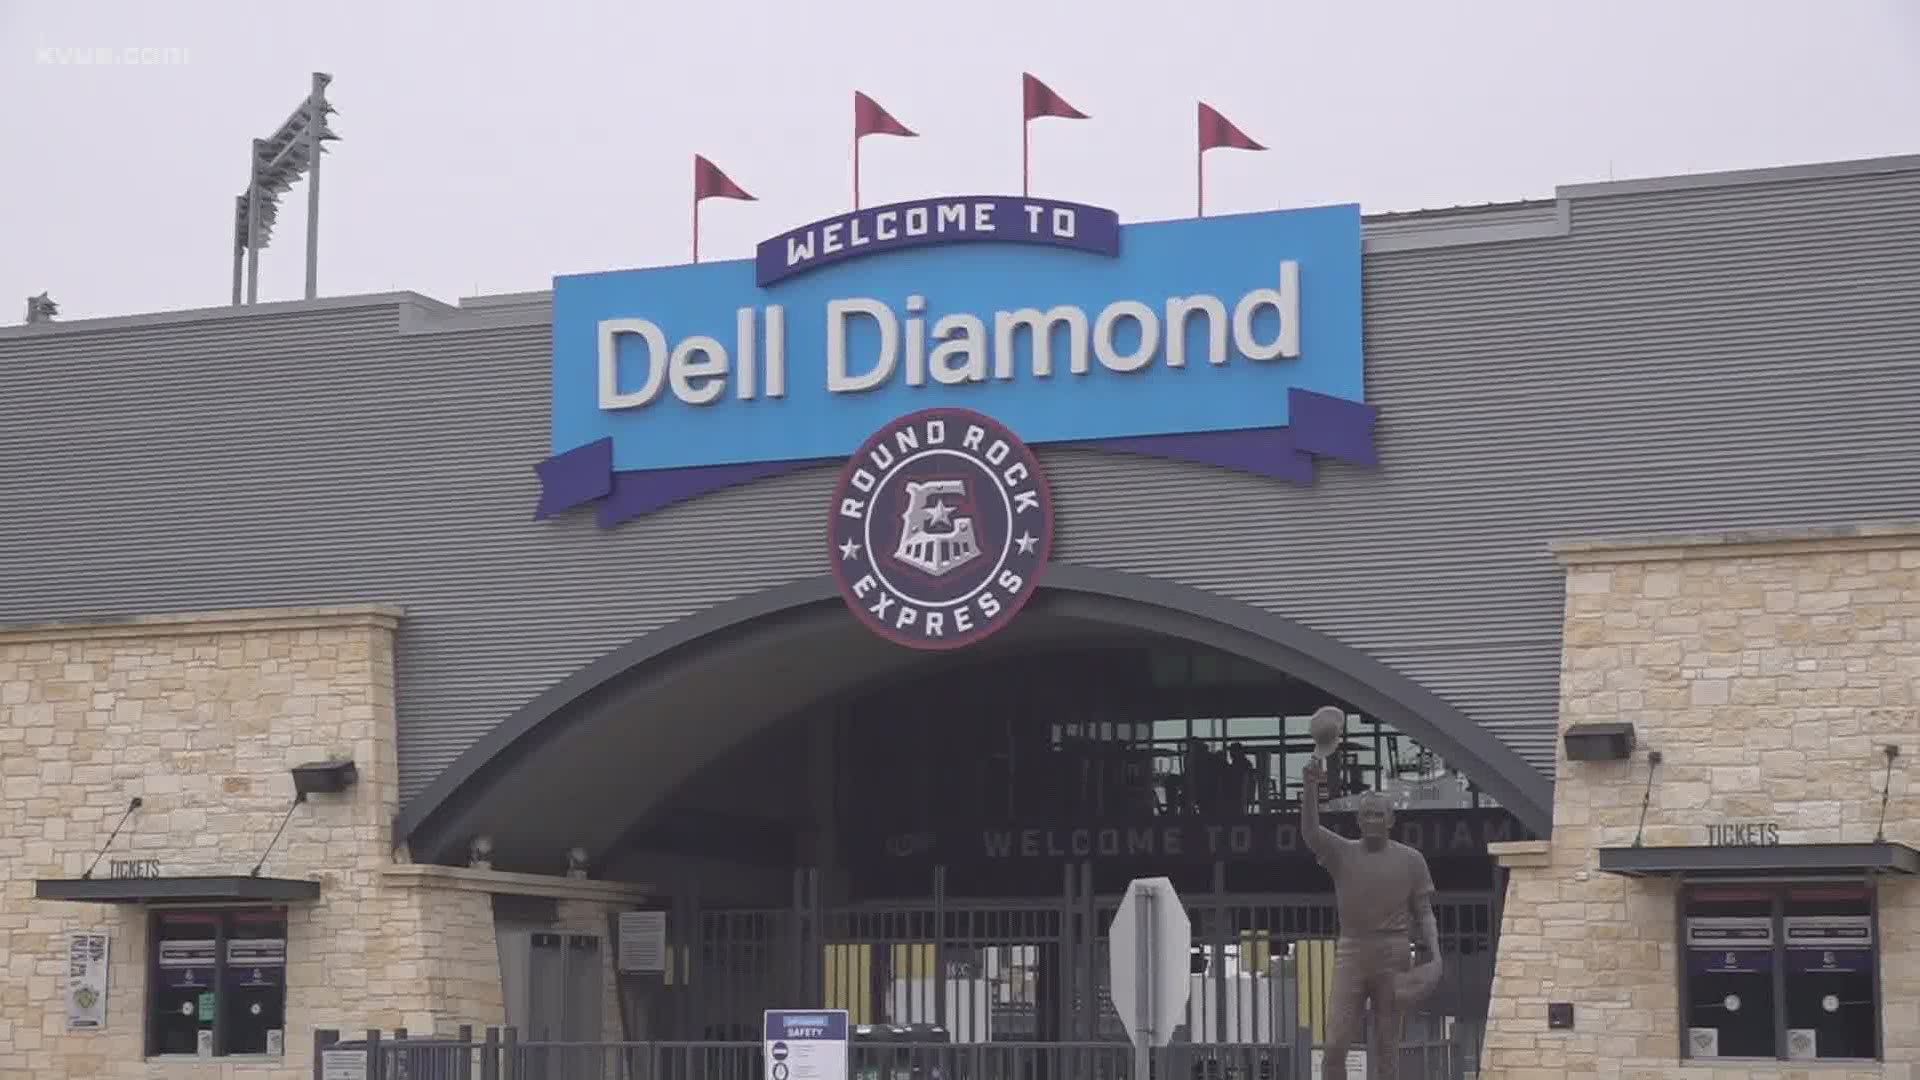 Leaders at Dell Diamond in Round Rock are putting aside the baseballs and bringing out the vaccines. The baseball stadium is opening as a COVID-19 vaccination site.